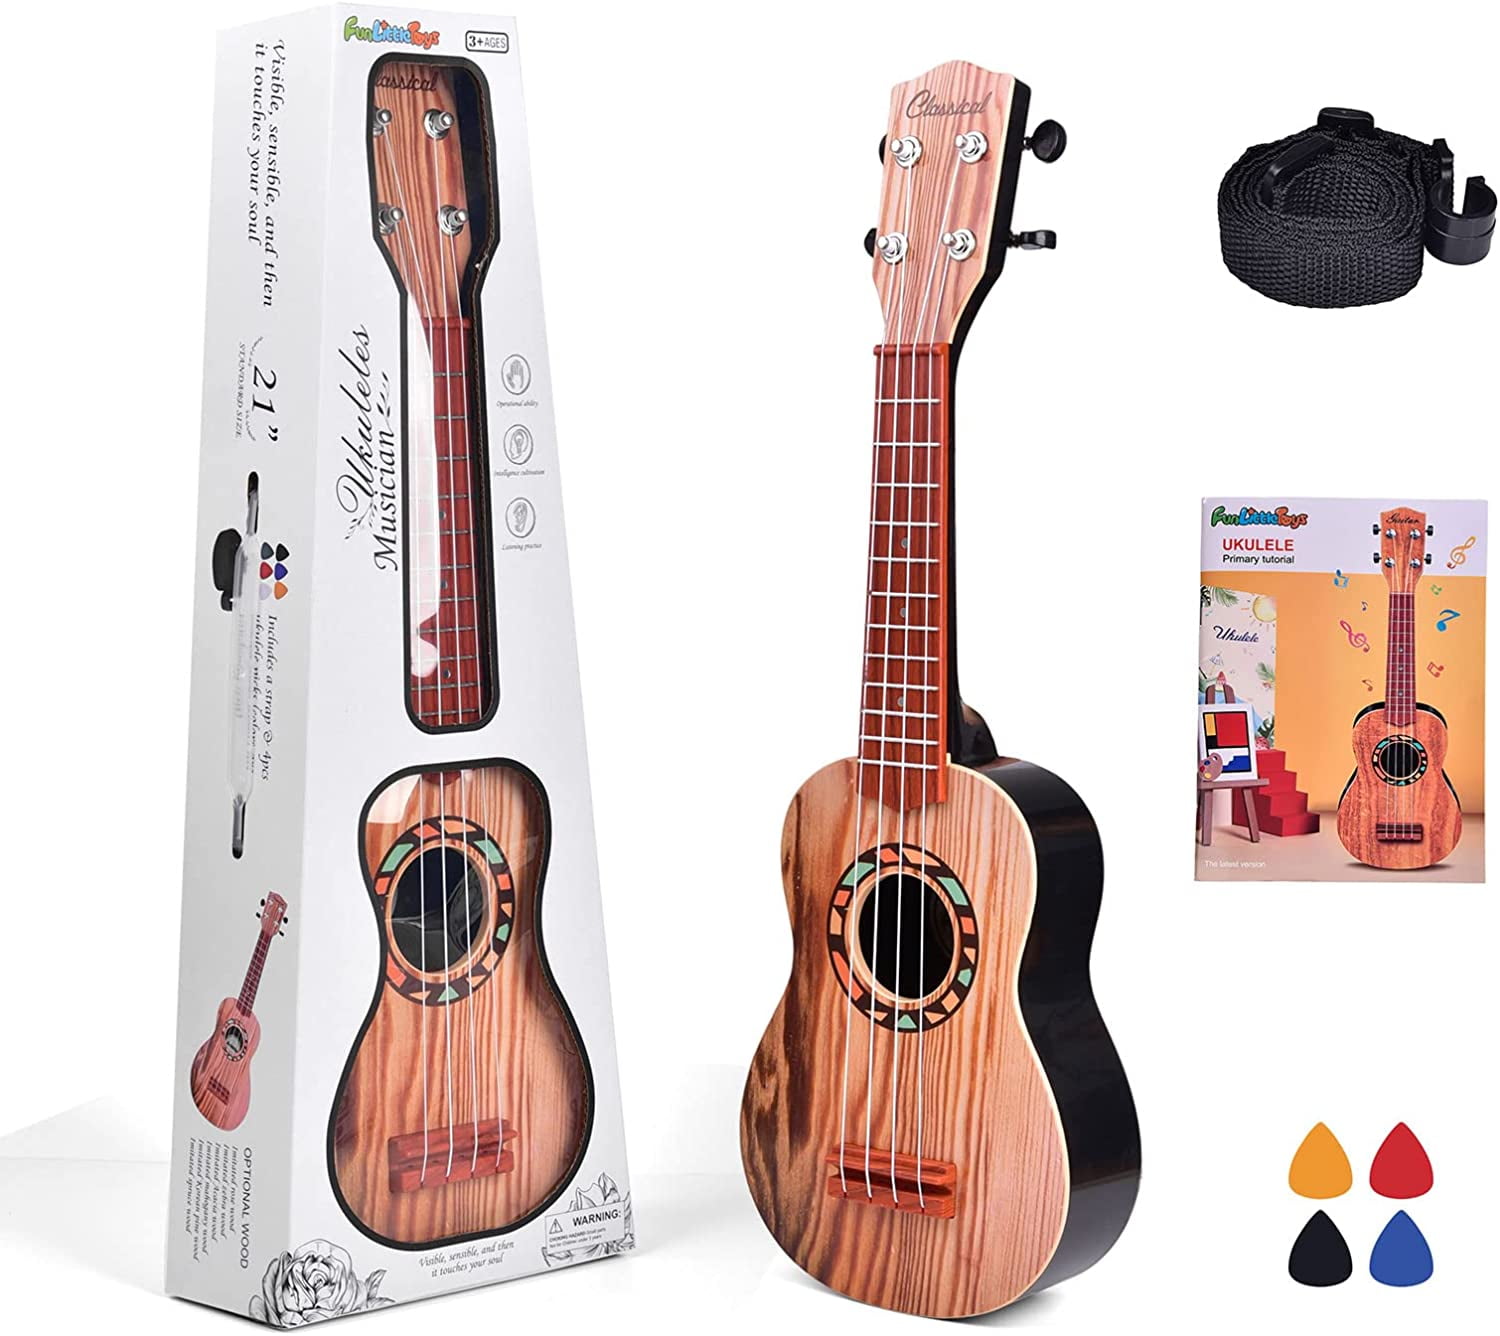 Fun Little Toys 21 Inch Toy Guitar Ukulele, Musical Instruments for Kids with Strap, Picks Tutorial, Learning Educational Toys Boys and Girls (Burlywood),Child -